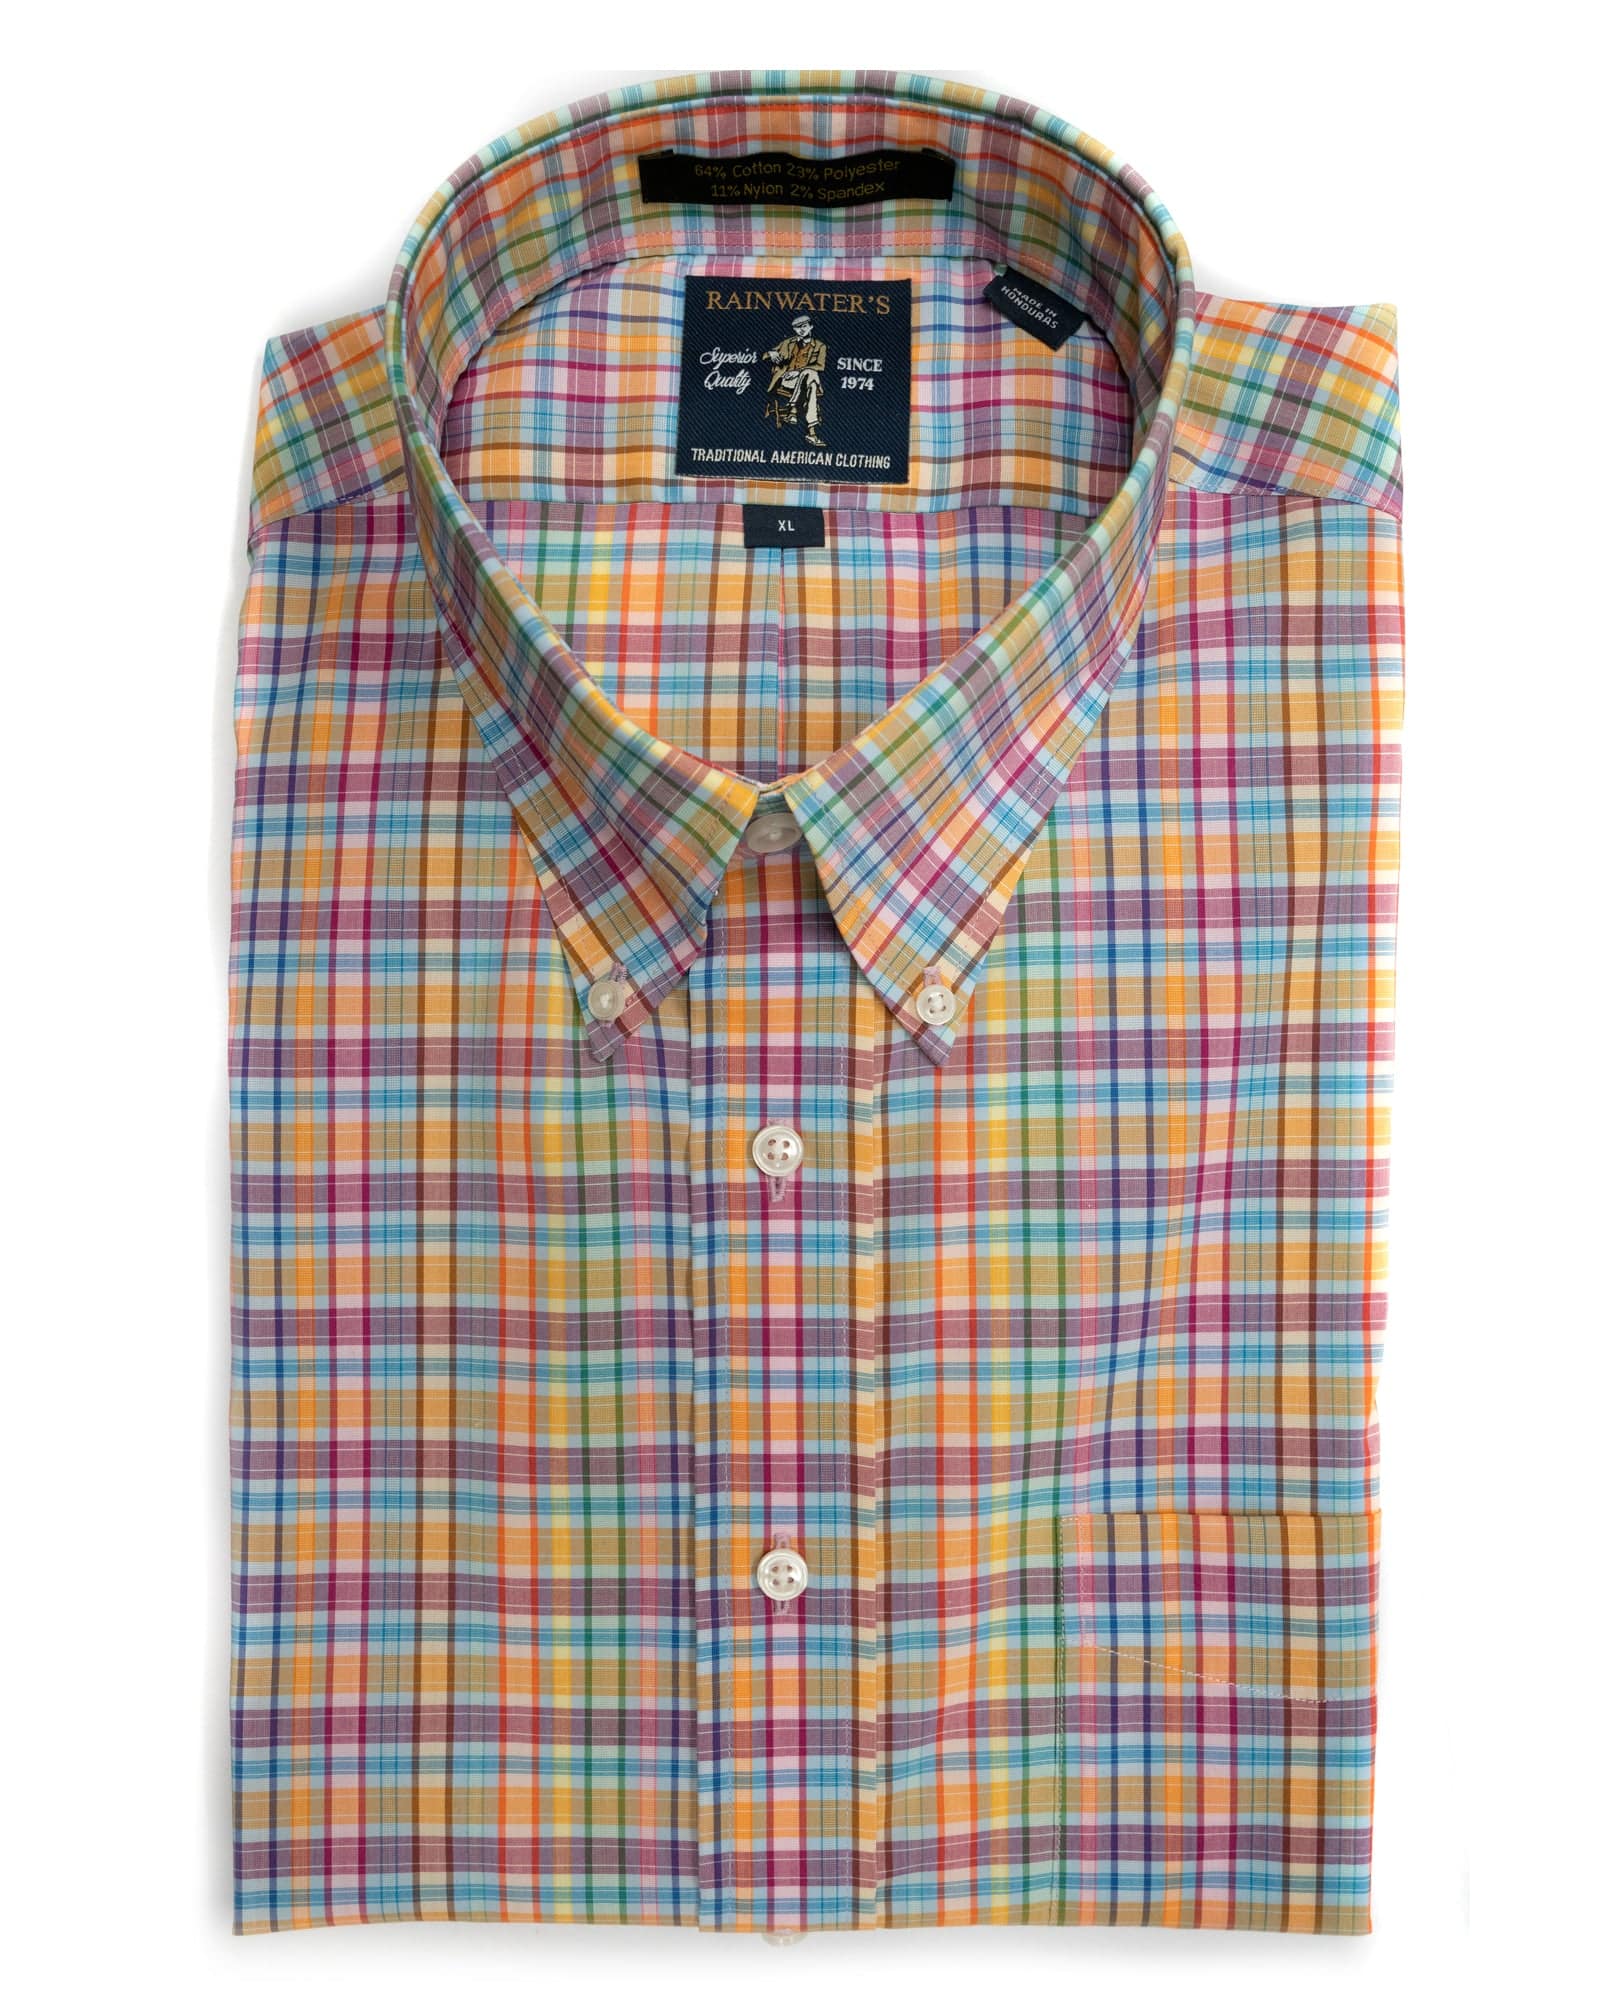 Rainwater's Multi Color Coral & Blue Tech Stretch Plaid Button Up Shirt - Rainwater's Men's Clothing and Tuxedo Rental